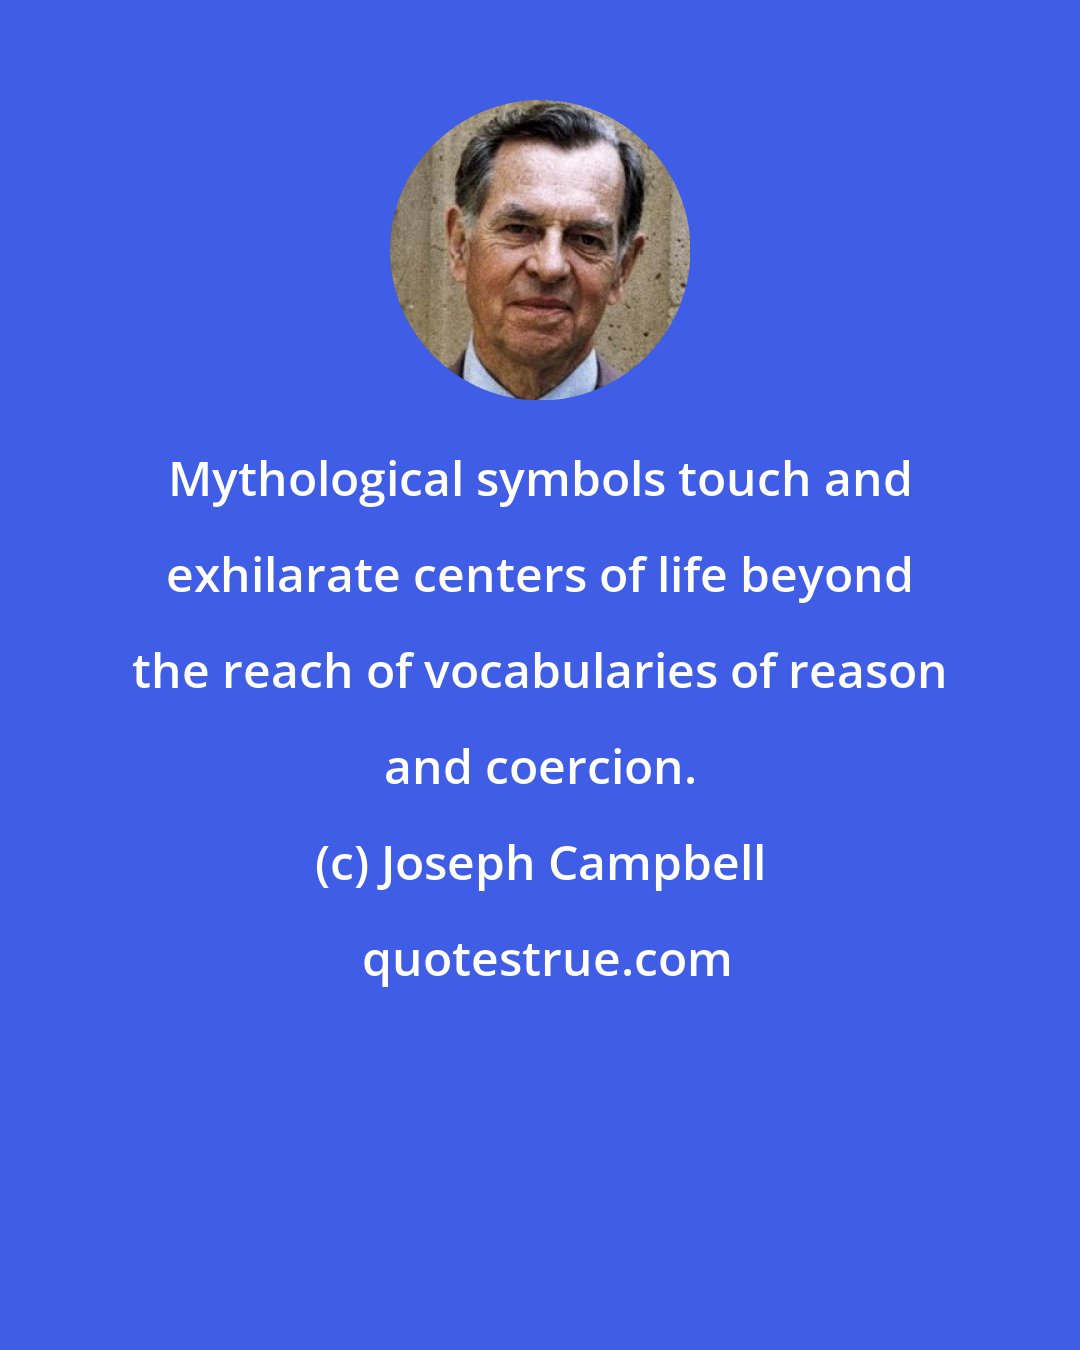 Joseph Campbell: Mythological symbols touch and exhilarate centers of life beyond the reach of vocabularies of reason and coercion.